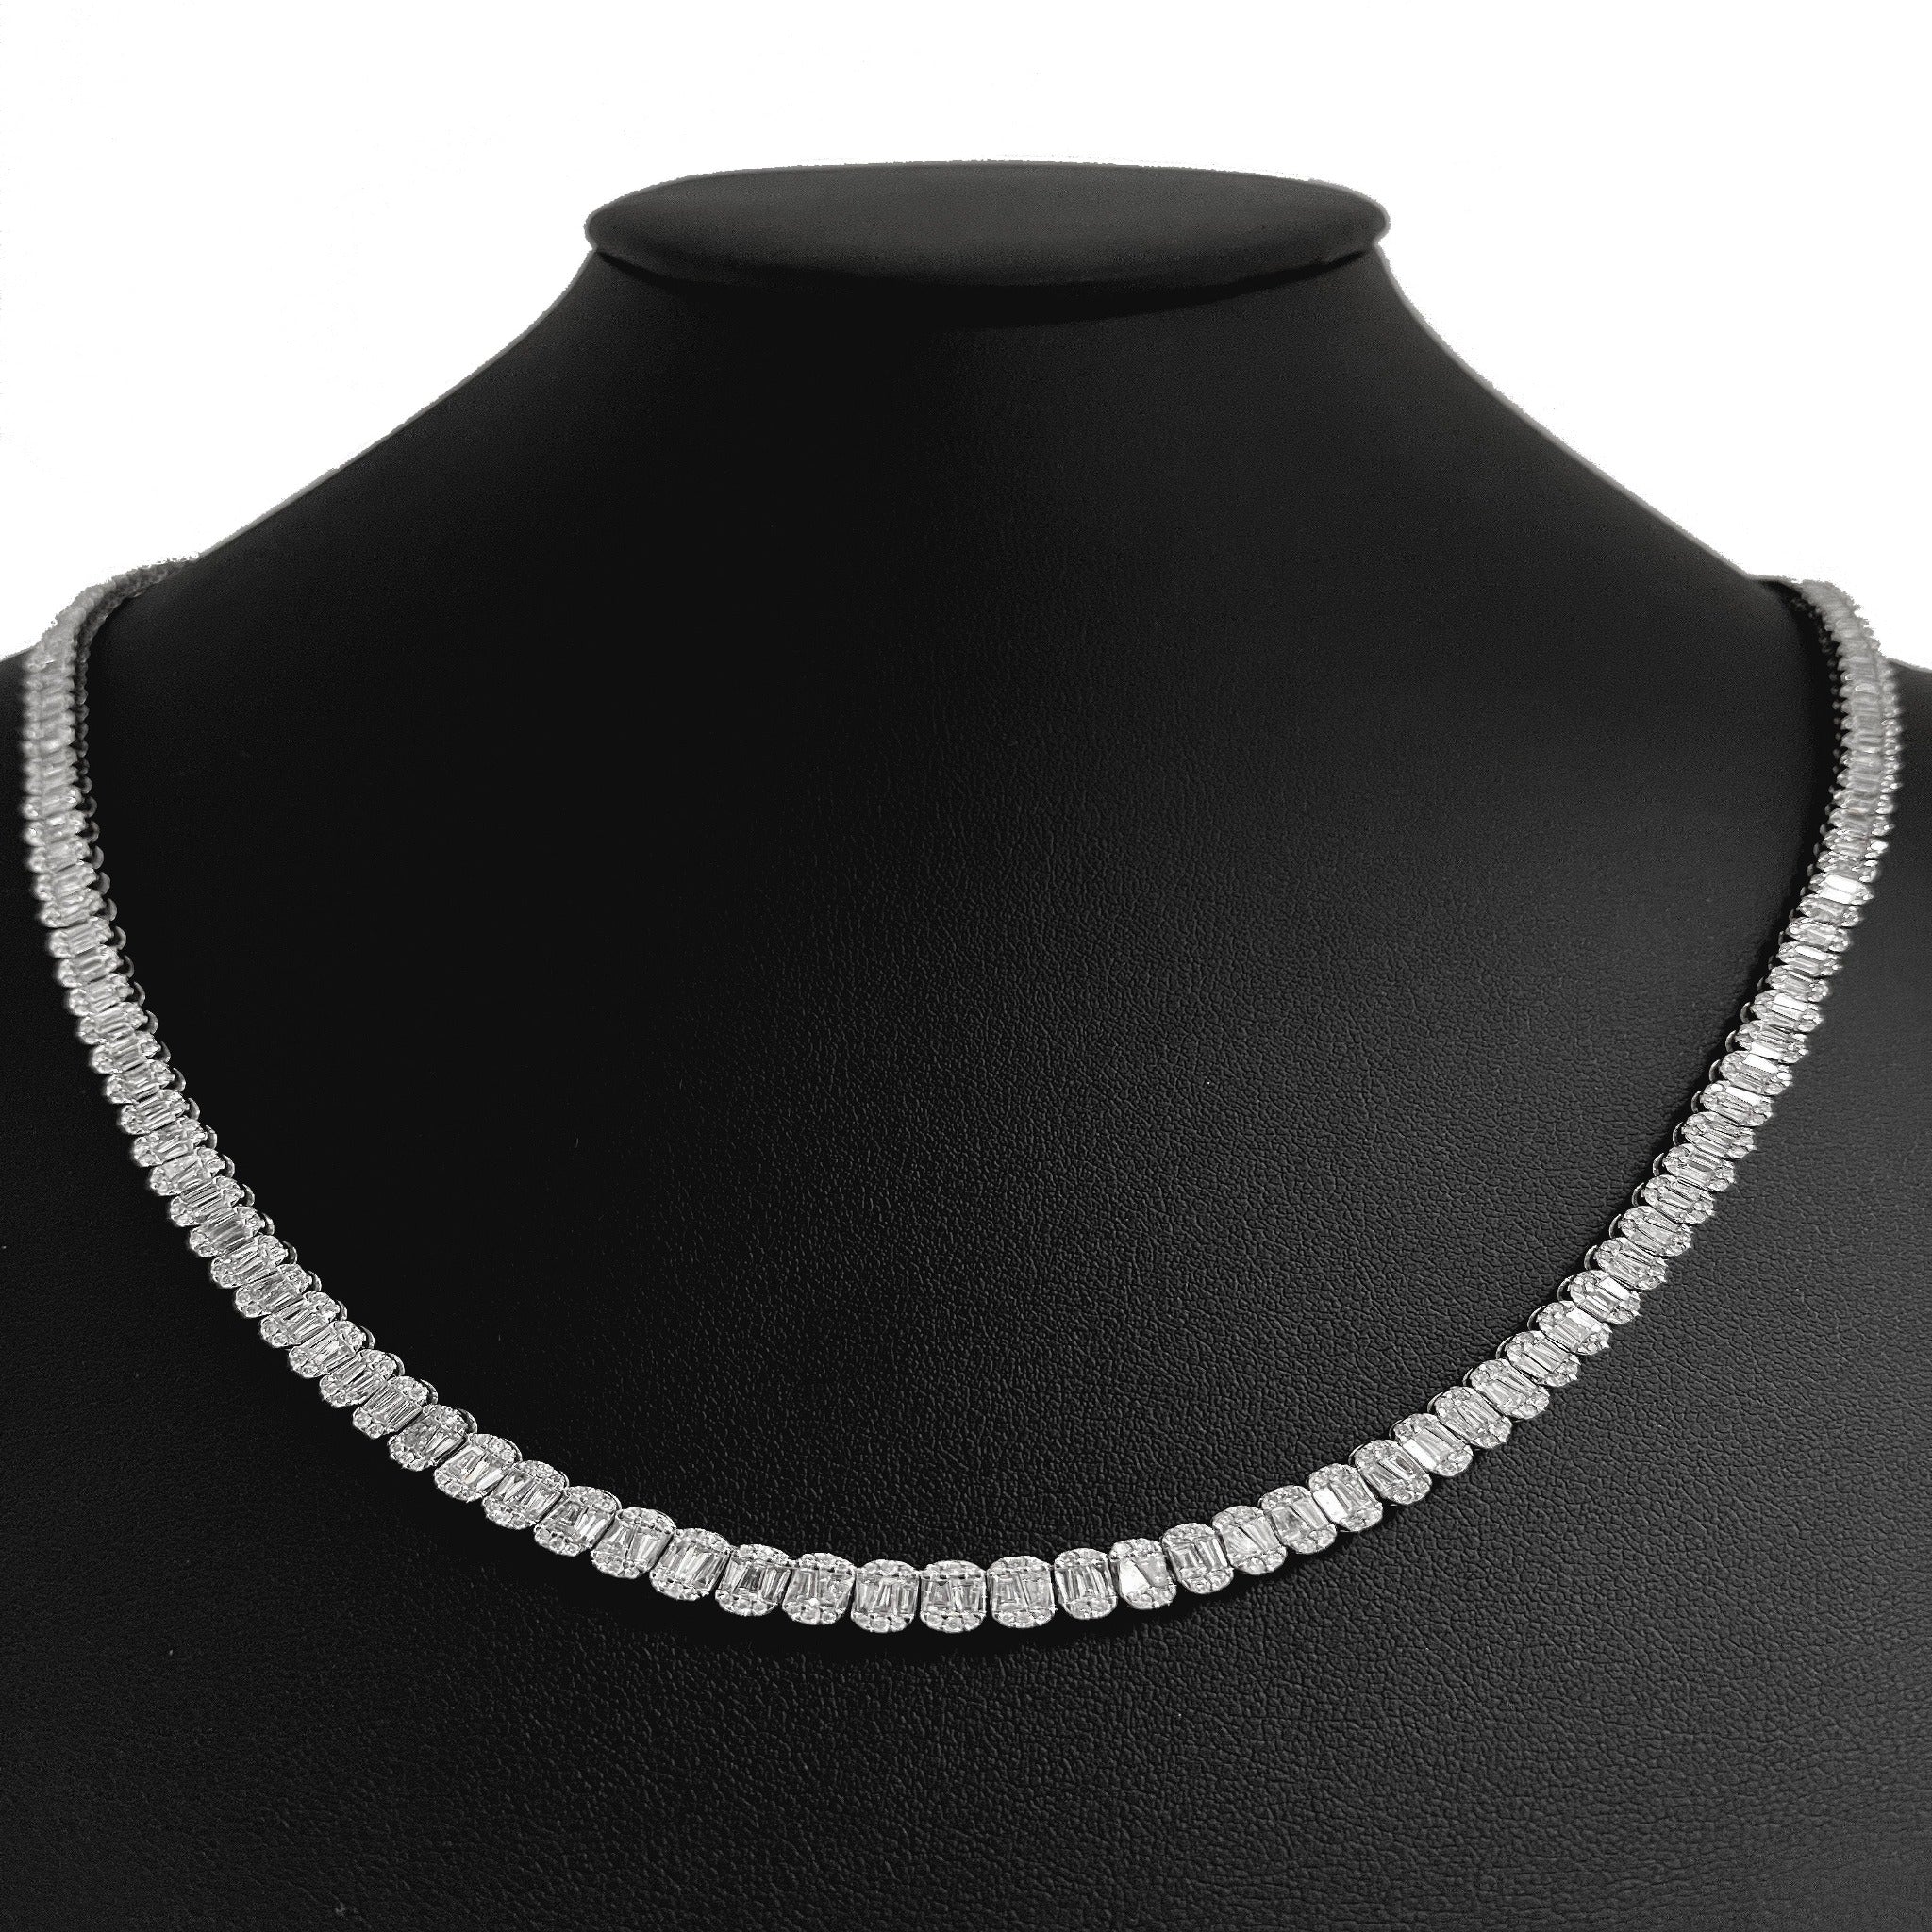 ''SPECIAL! 9.78ct G SI 14K White Gold Round & Baguette DIAMOND Tennis Necklace 22'''' Long''